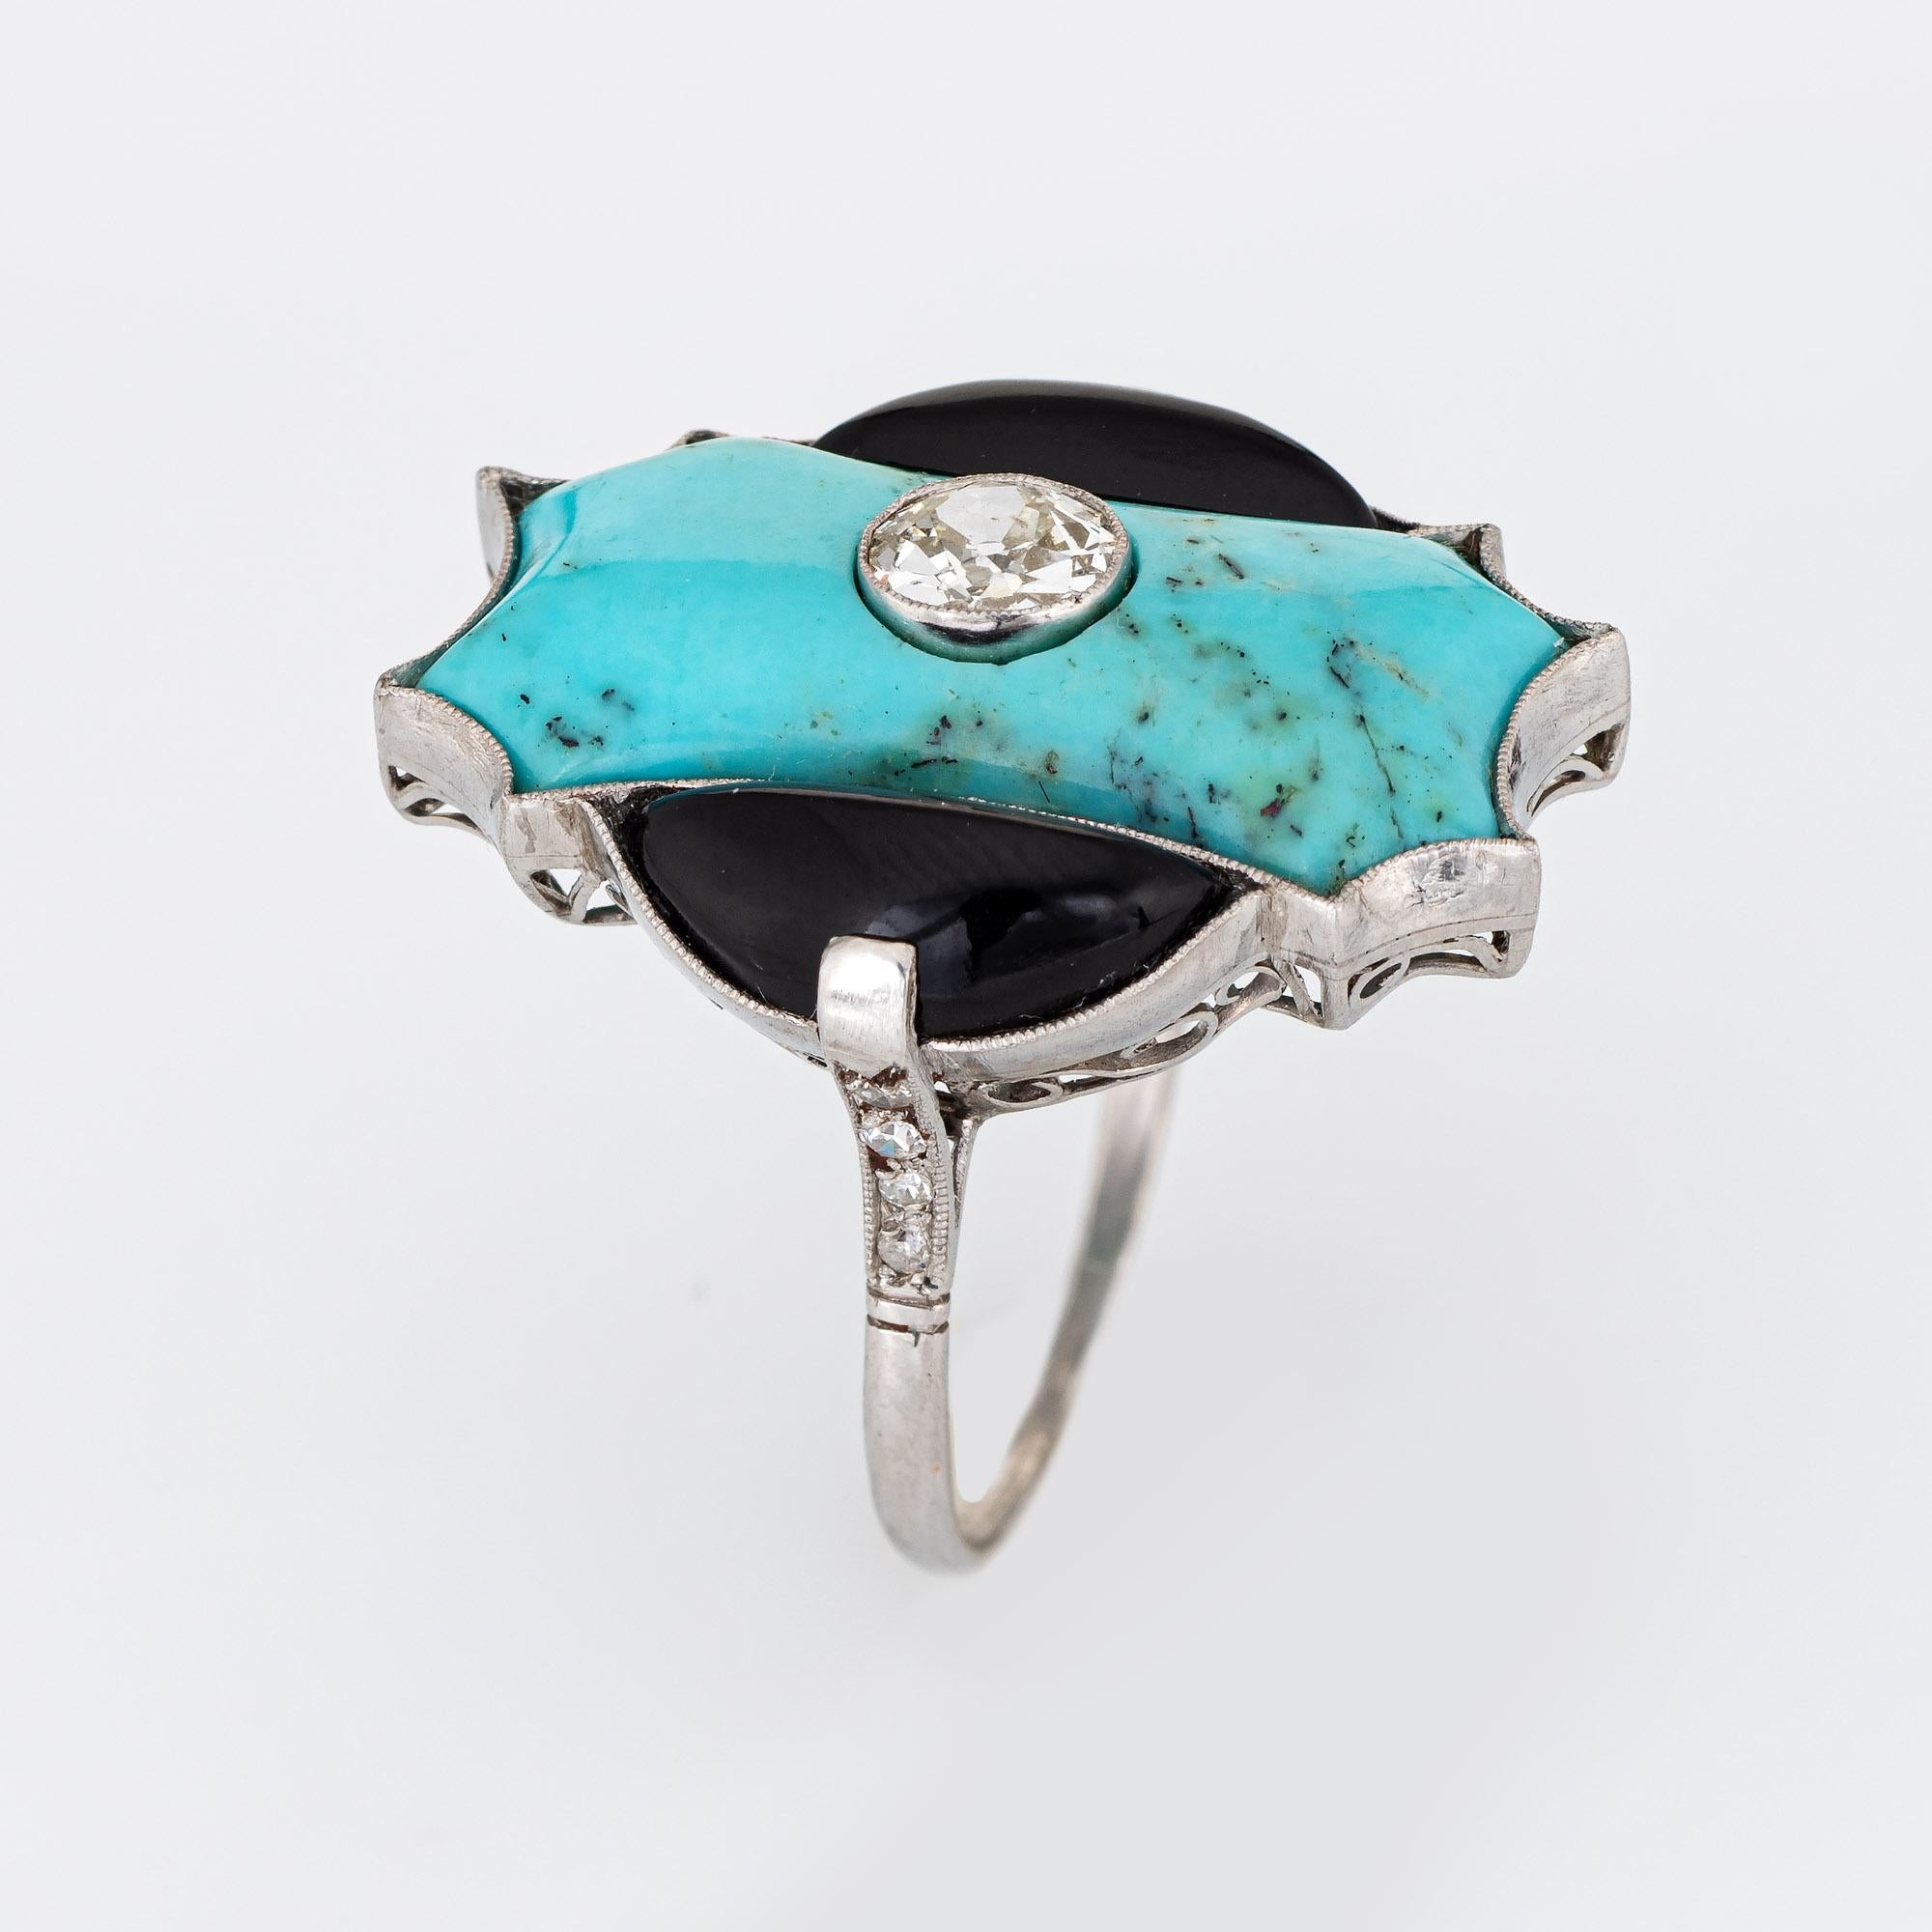 Finely detailed vintage Art Deco diamond, turquoise & onyx cocktail ring (circa 1920s to 1930s) crafted in platinum.

Centrally mounted old European cut diamond is estimated at 0.50 carats (estimated at J-K color and SI1 clarity). Turquoise measures